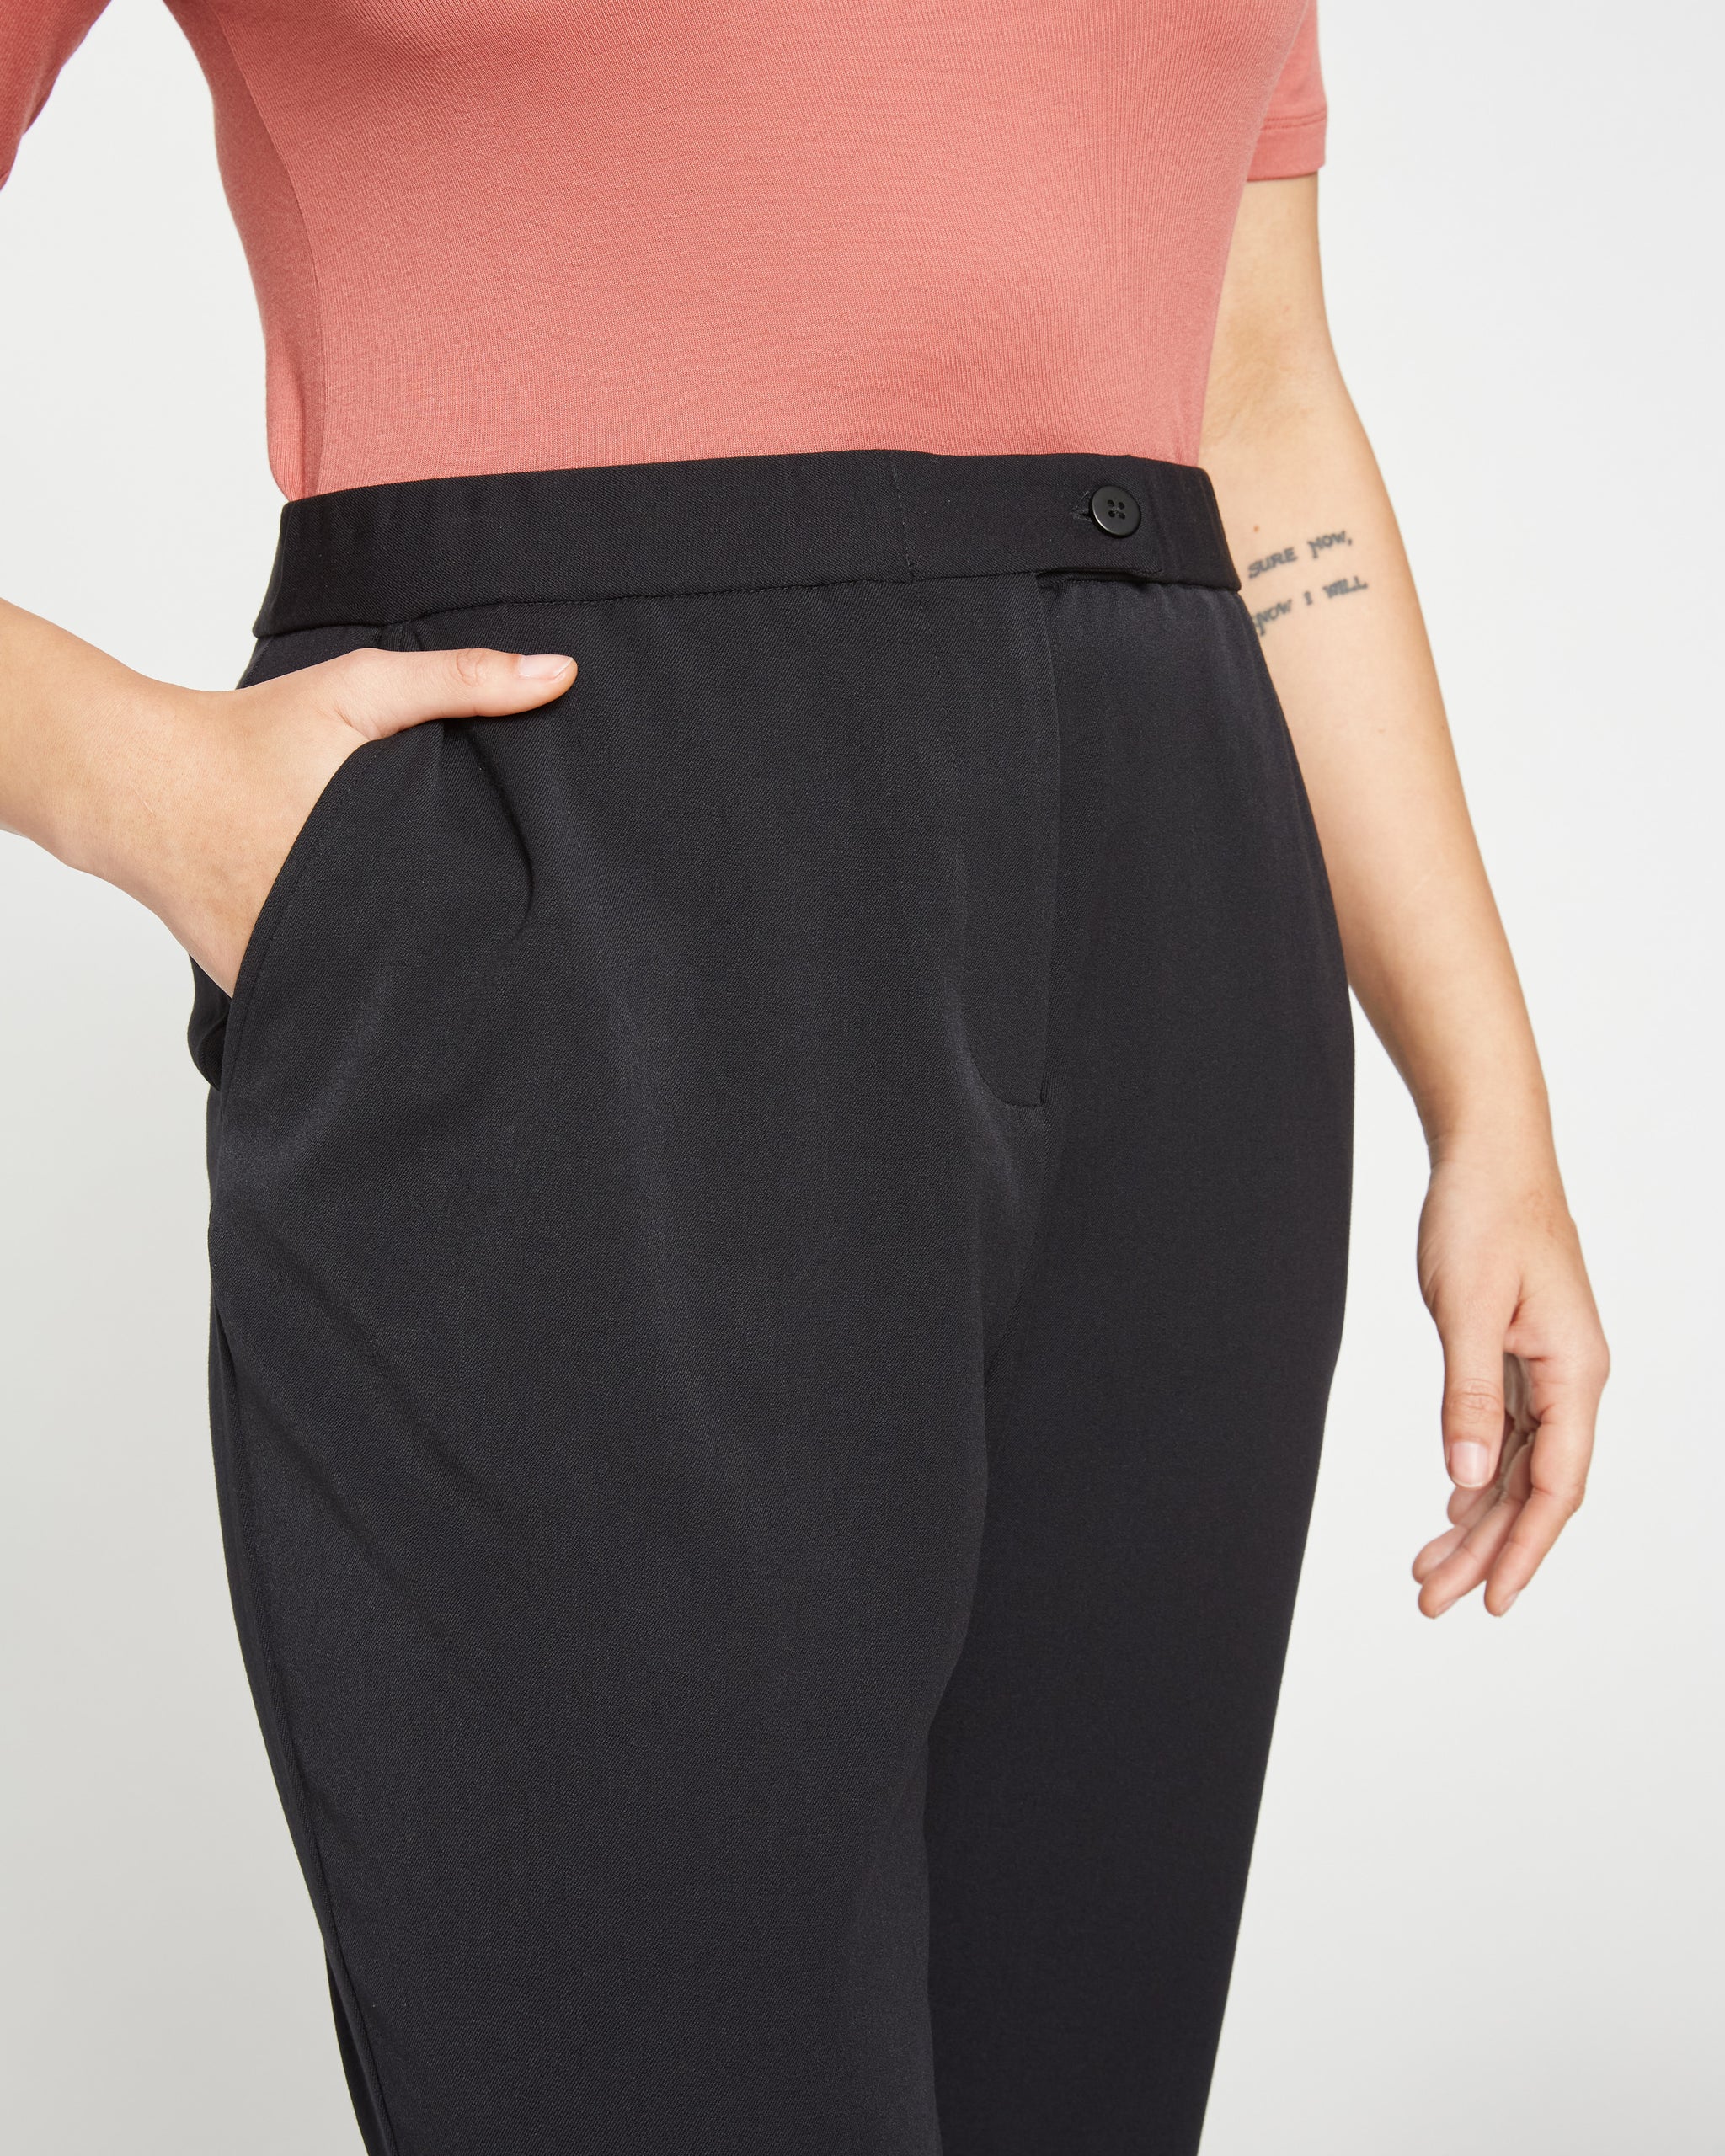 A Casual Way to Wear Black Cigarette Pants